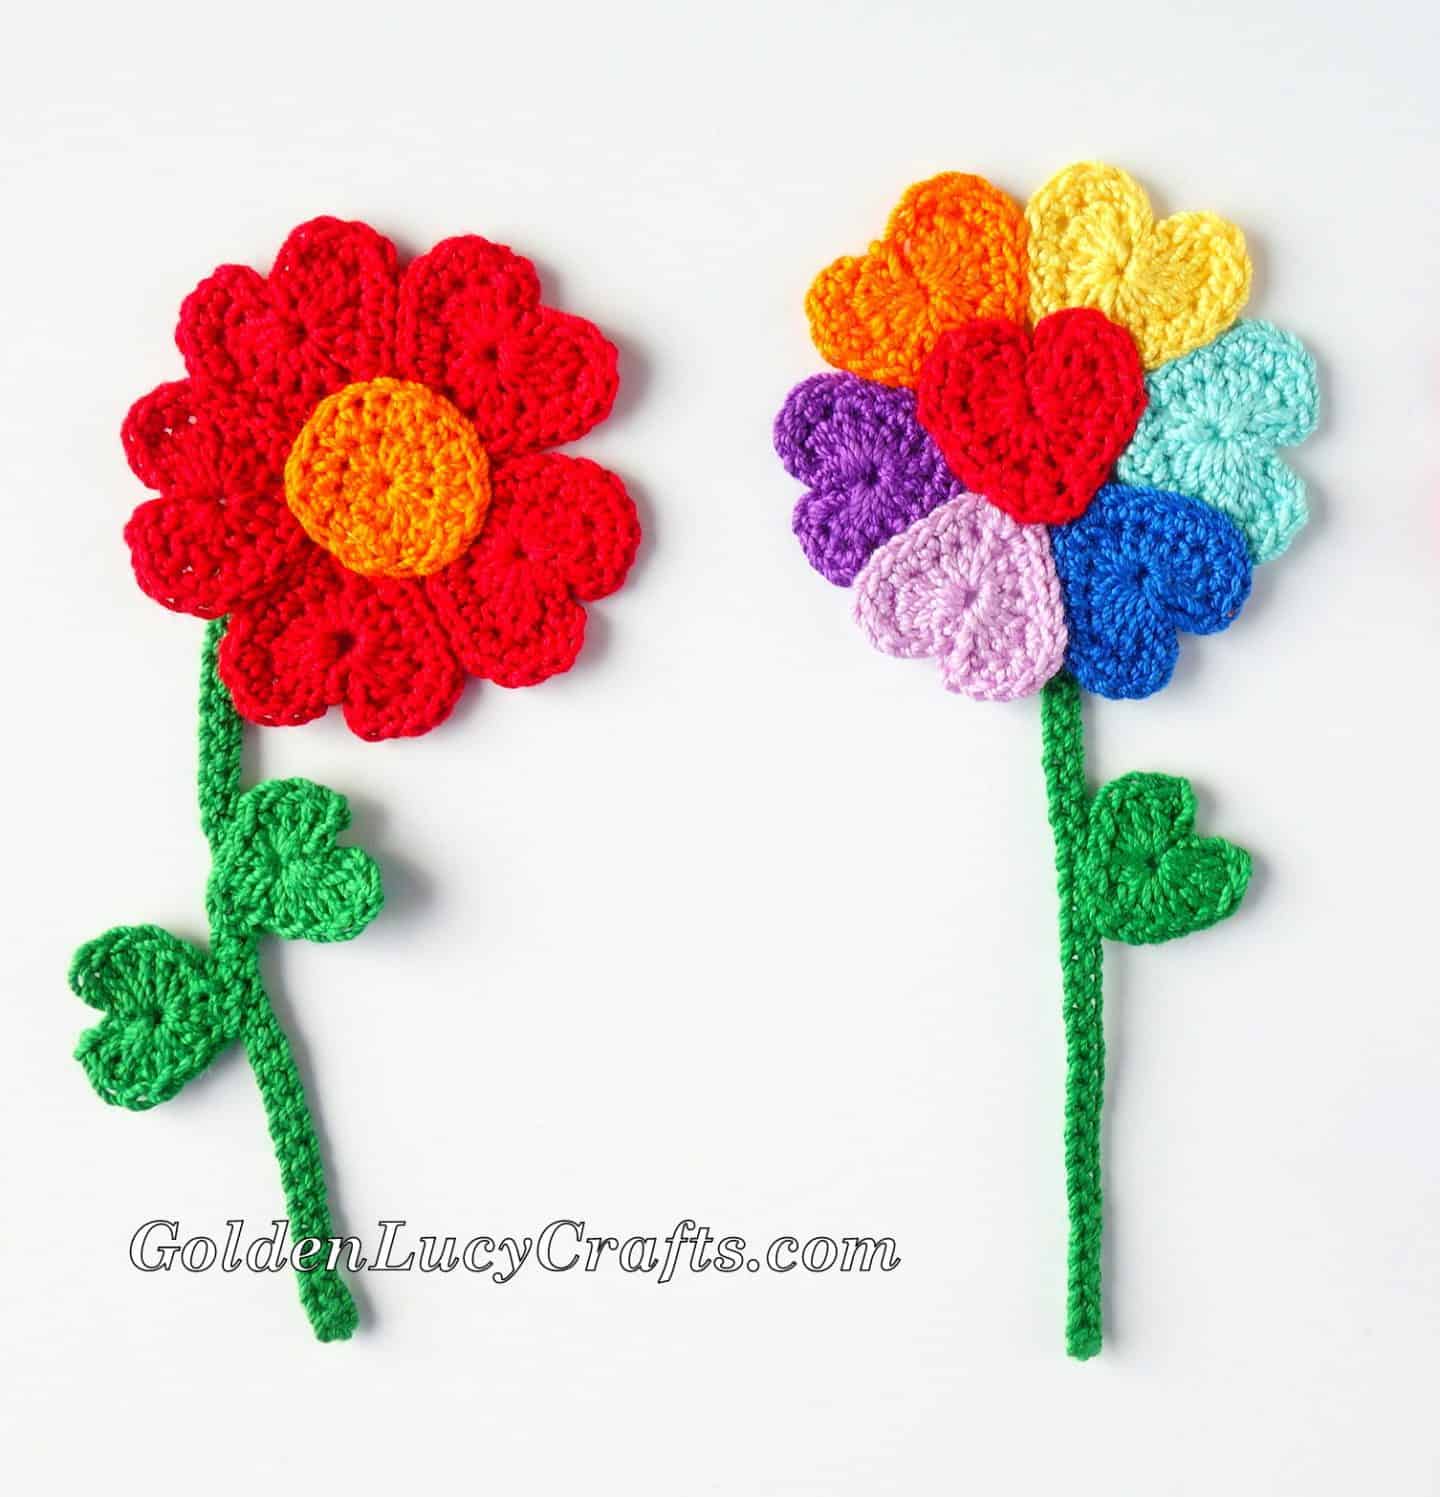 Two crochet flowers made from hearts.